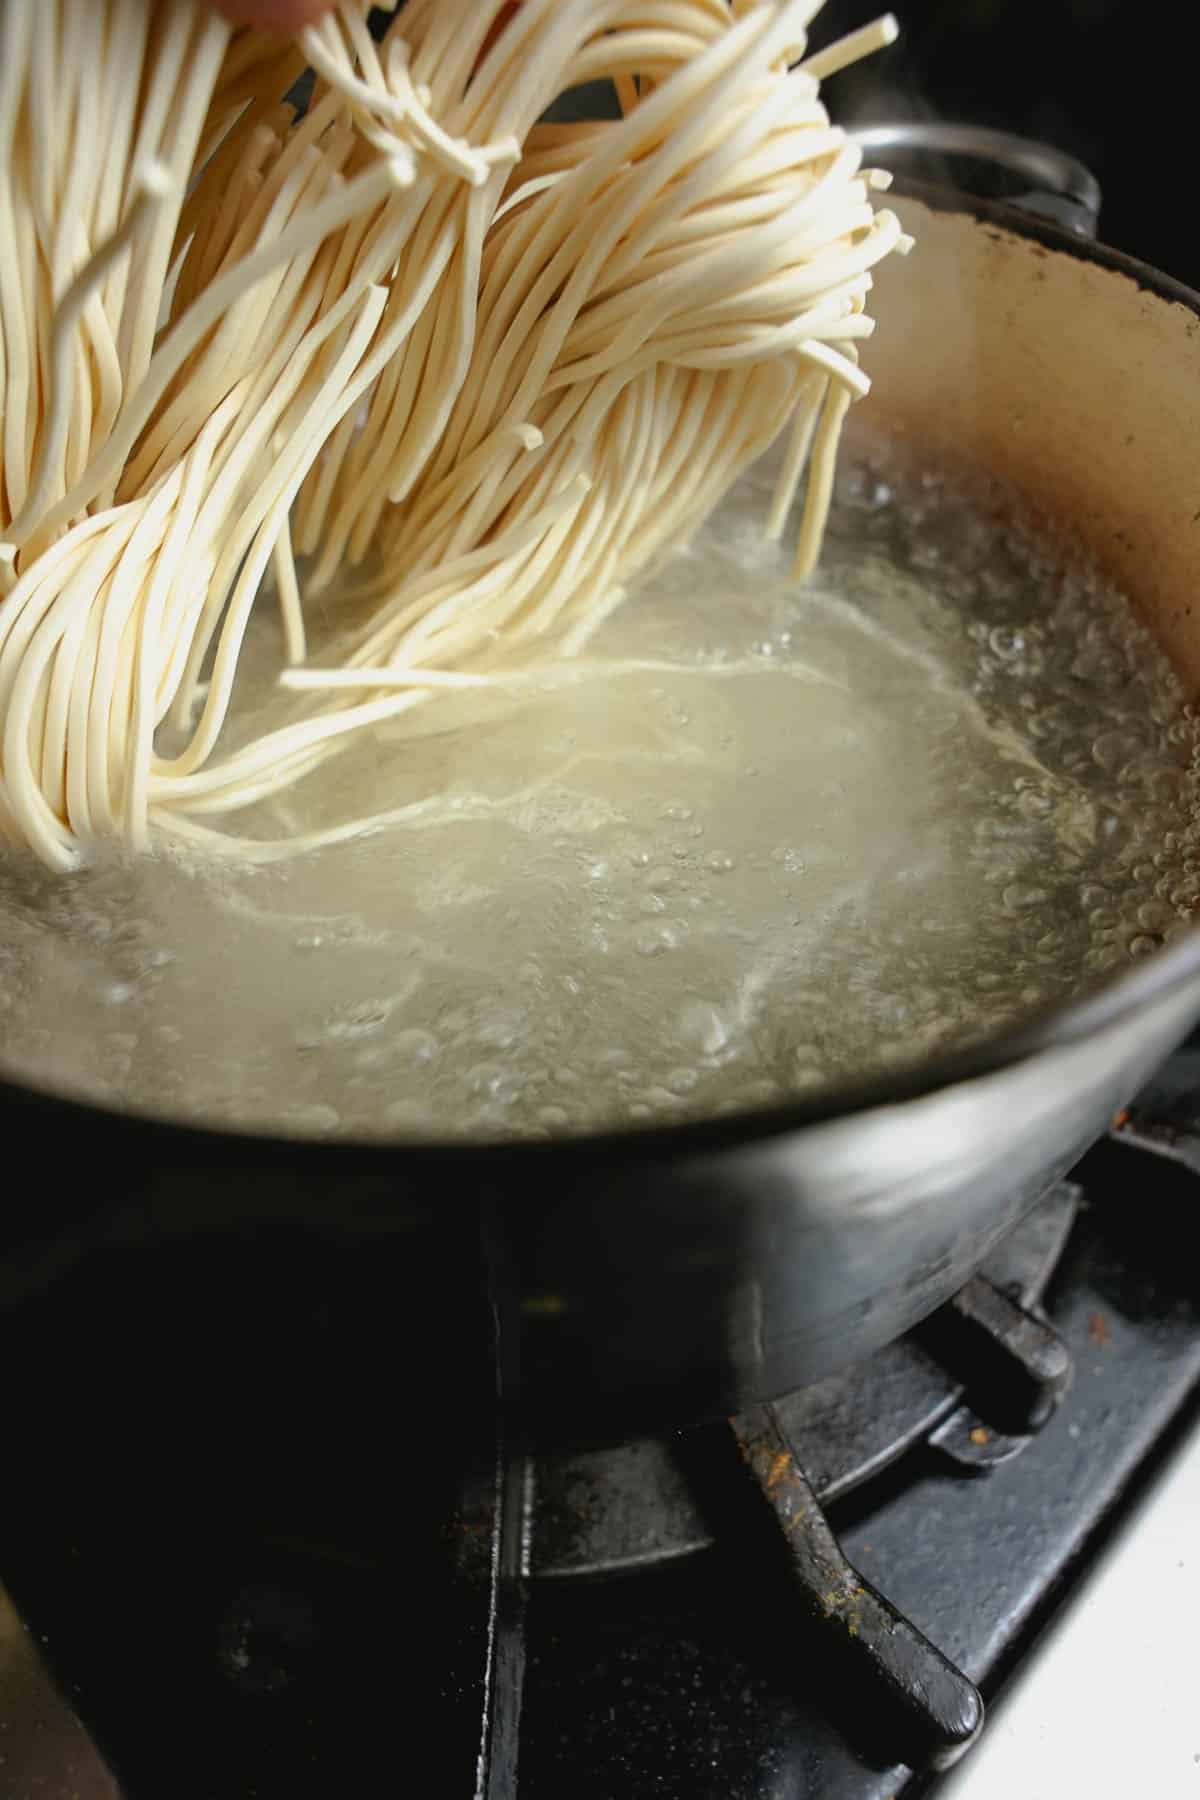 Noodles are added to boiling water to cook until al dente.